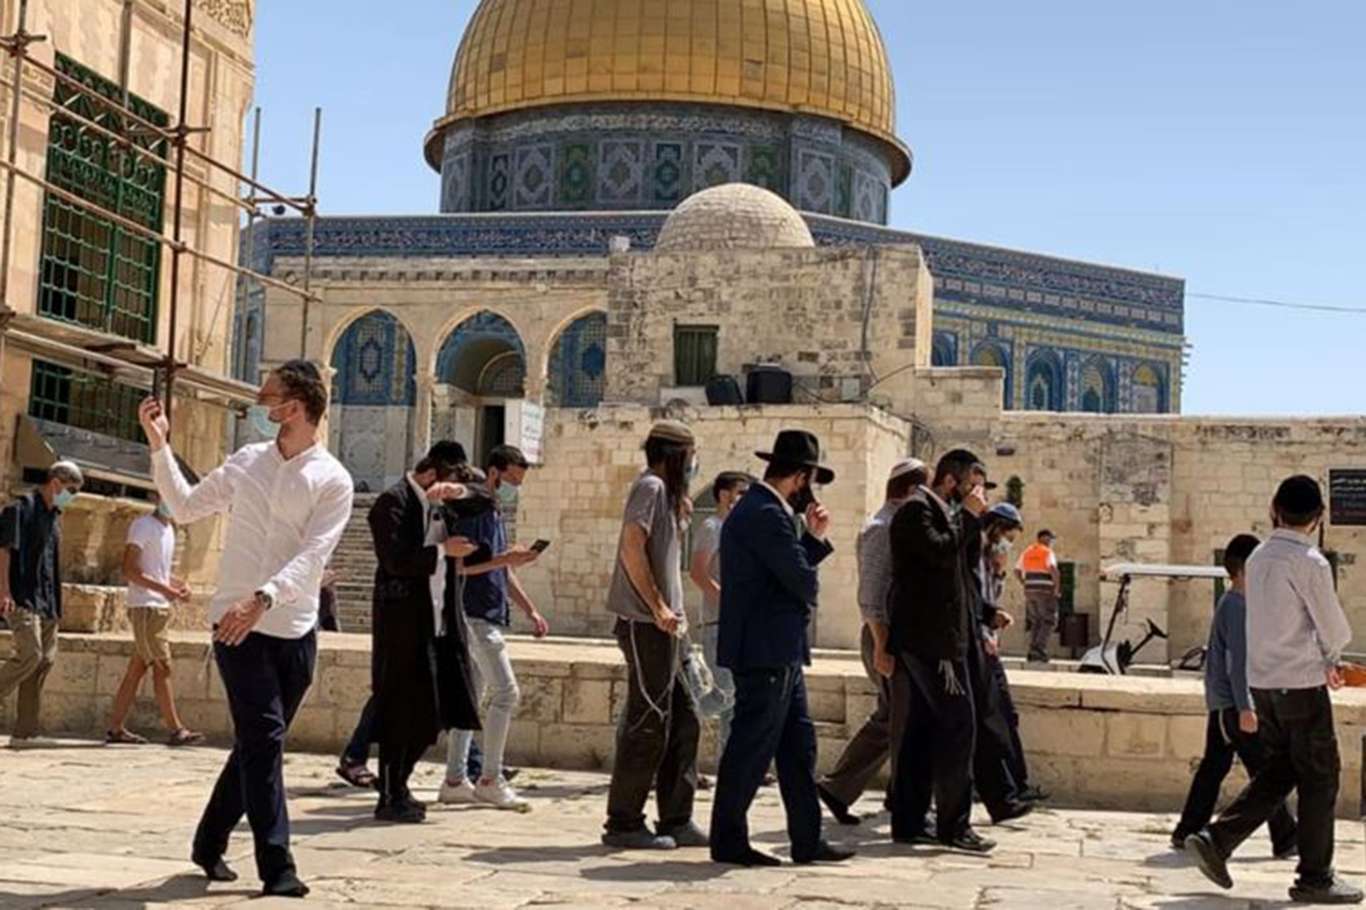 More than 150 zionist settlers defile Aqsa Mosque in morning tour